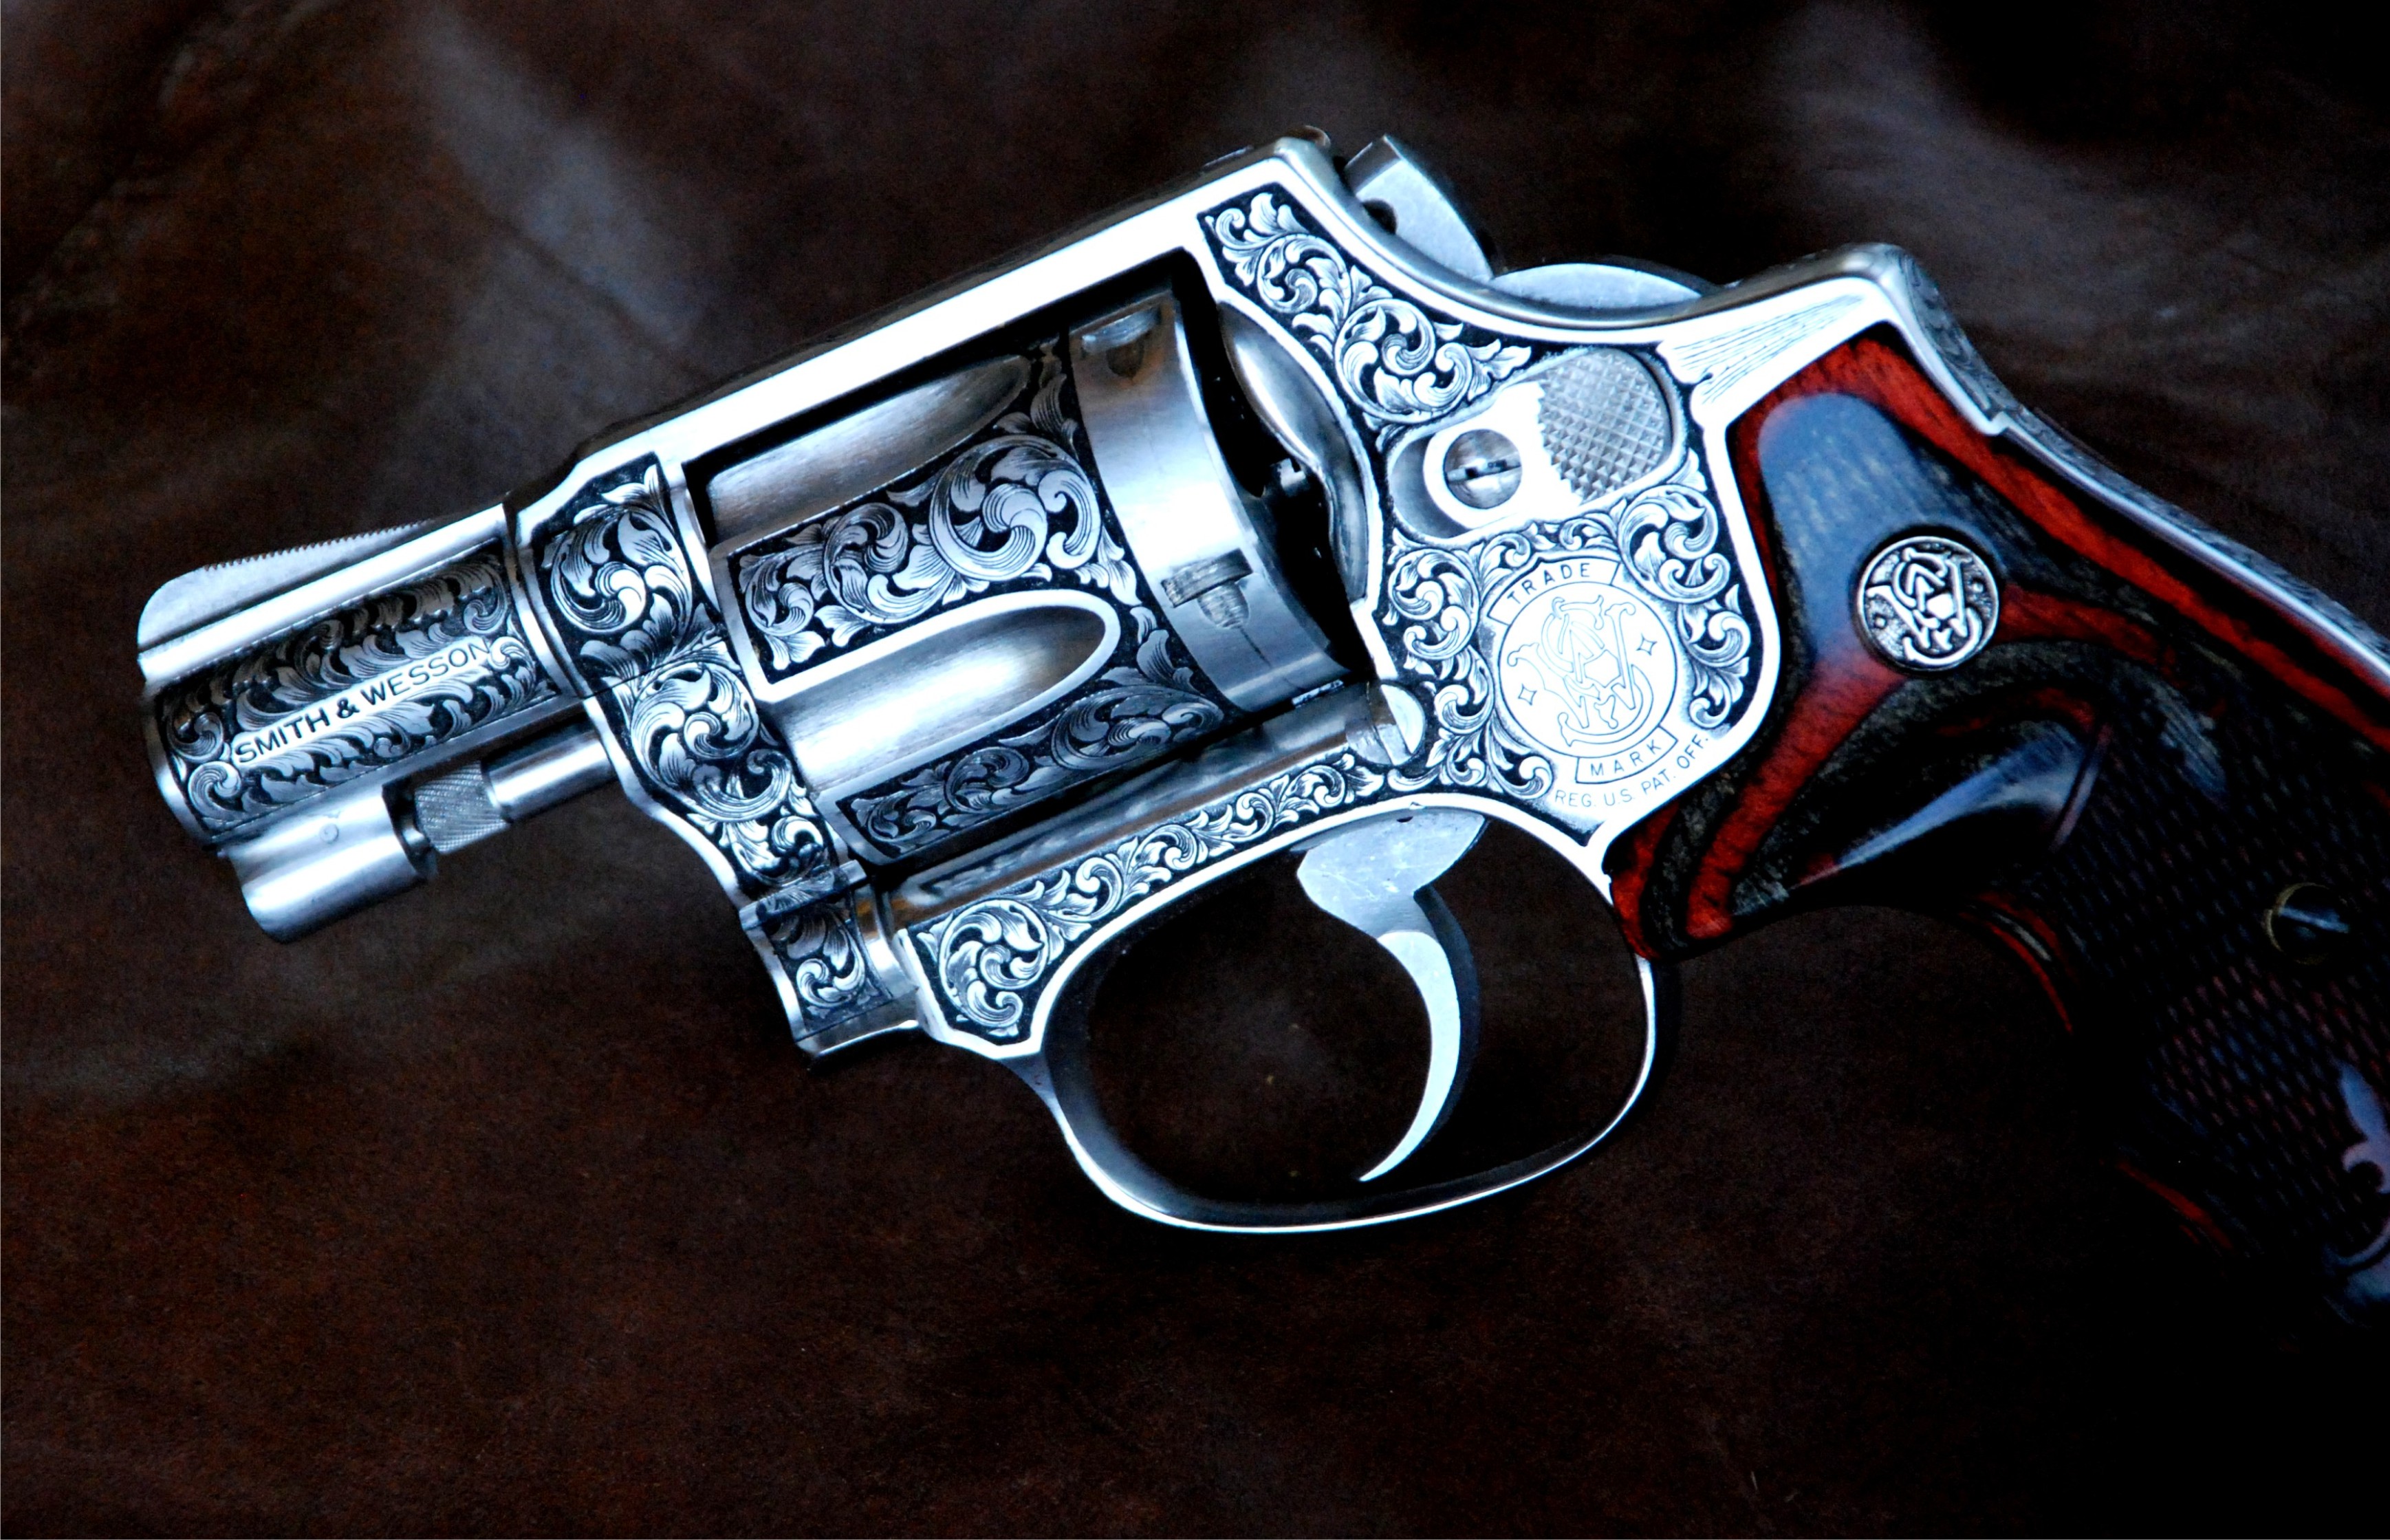 Weapons Revolver 3475x2239